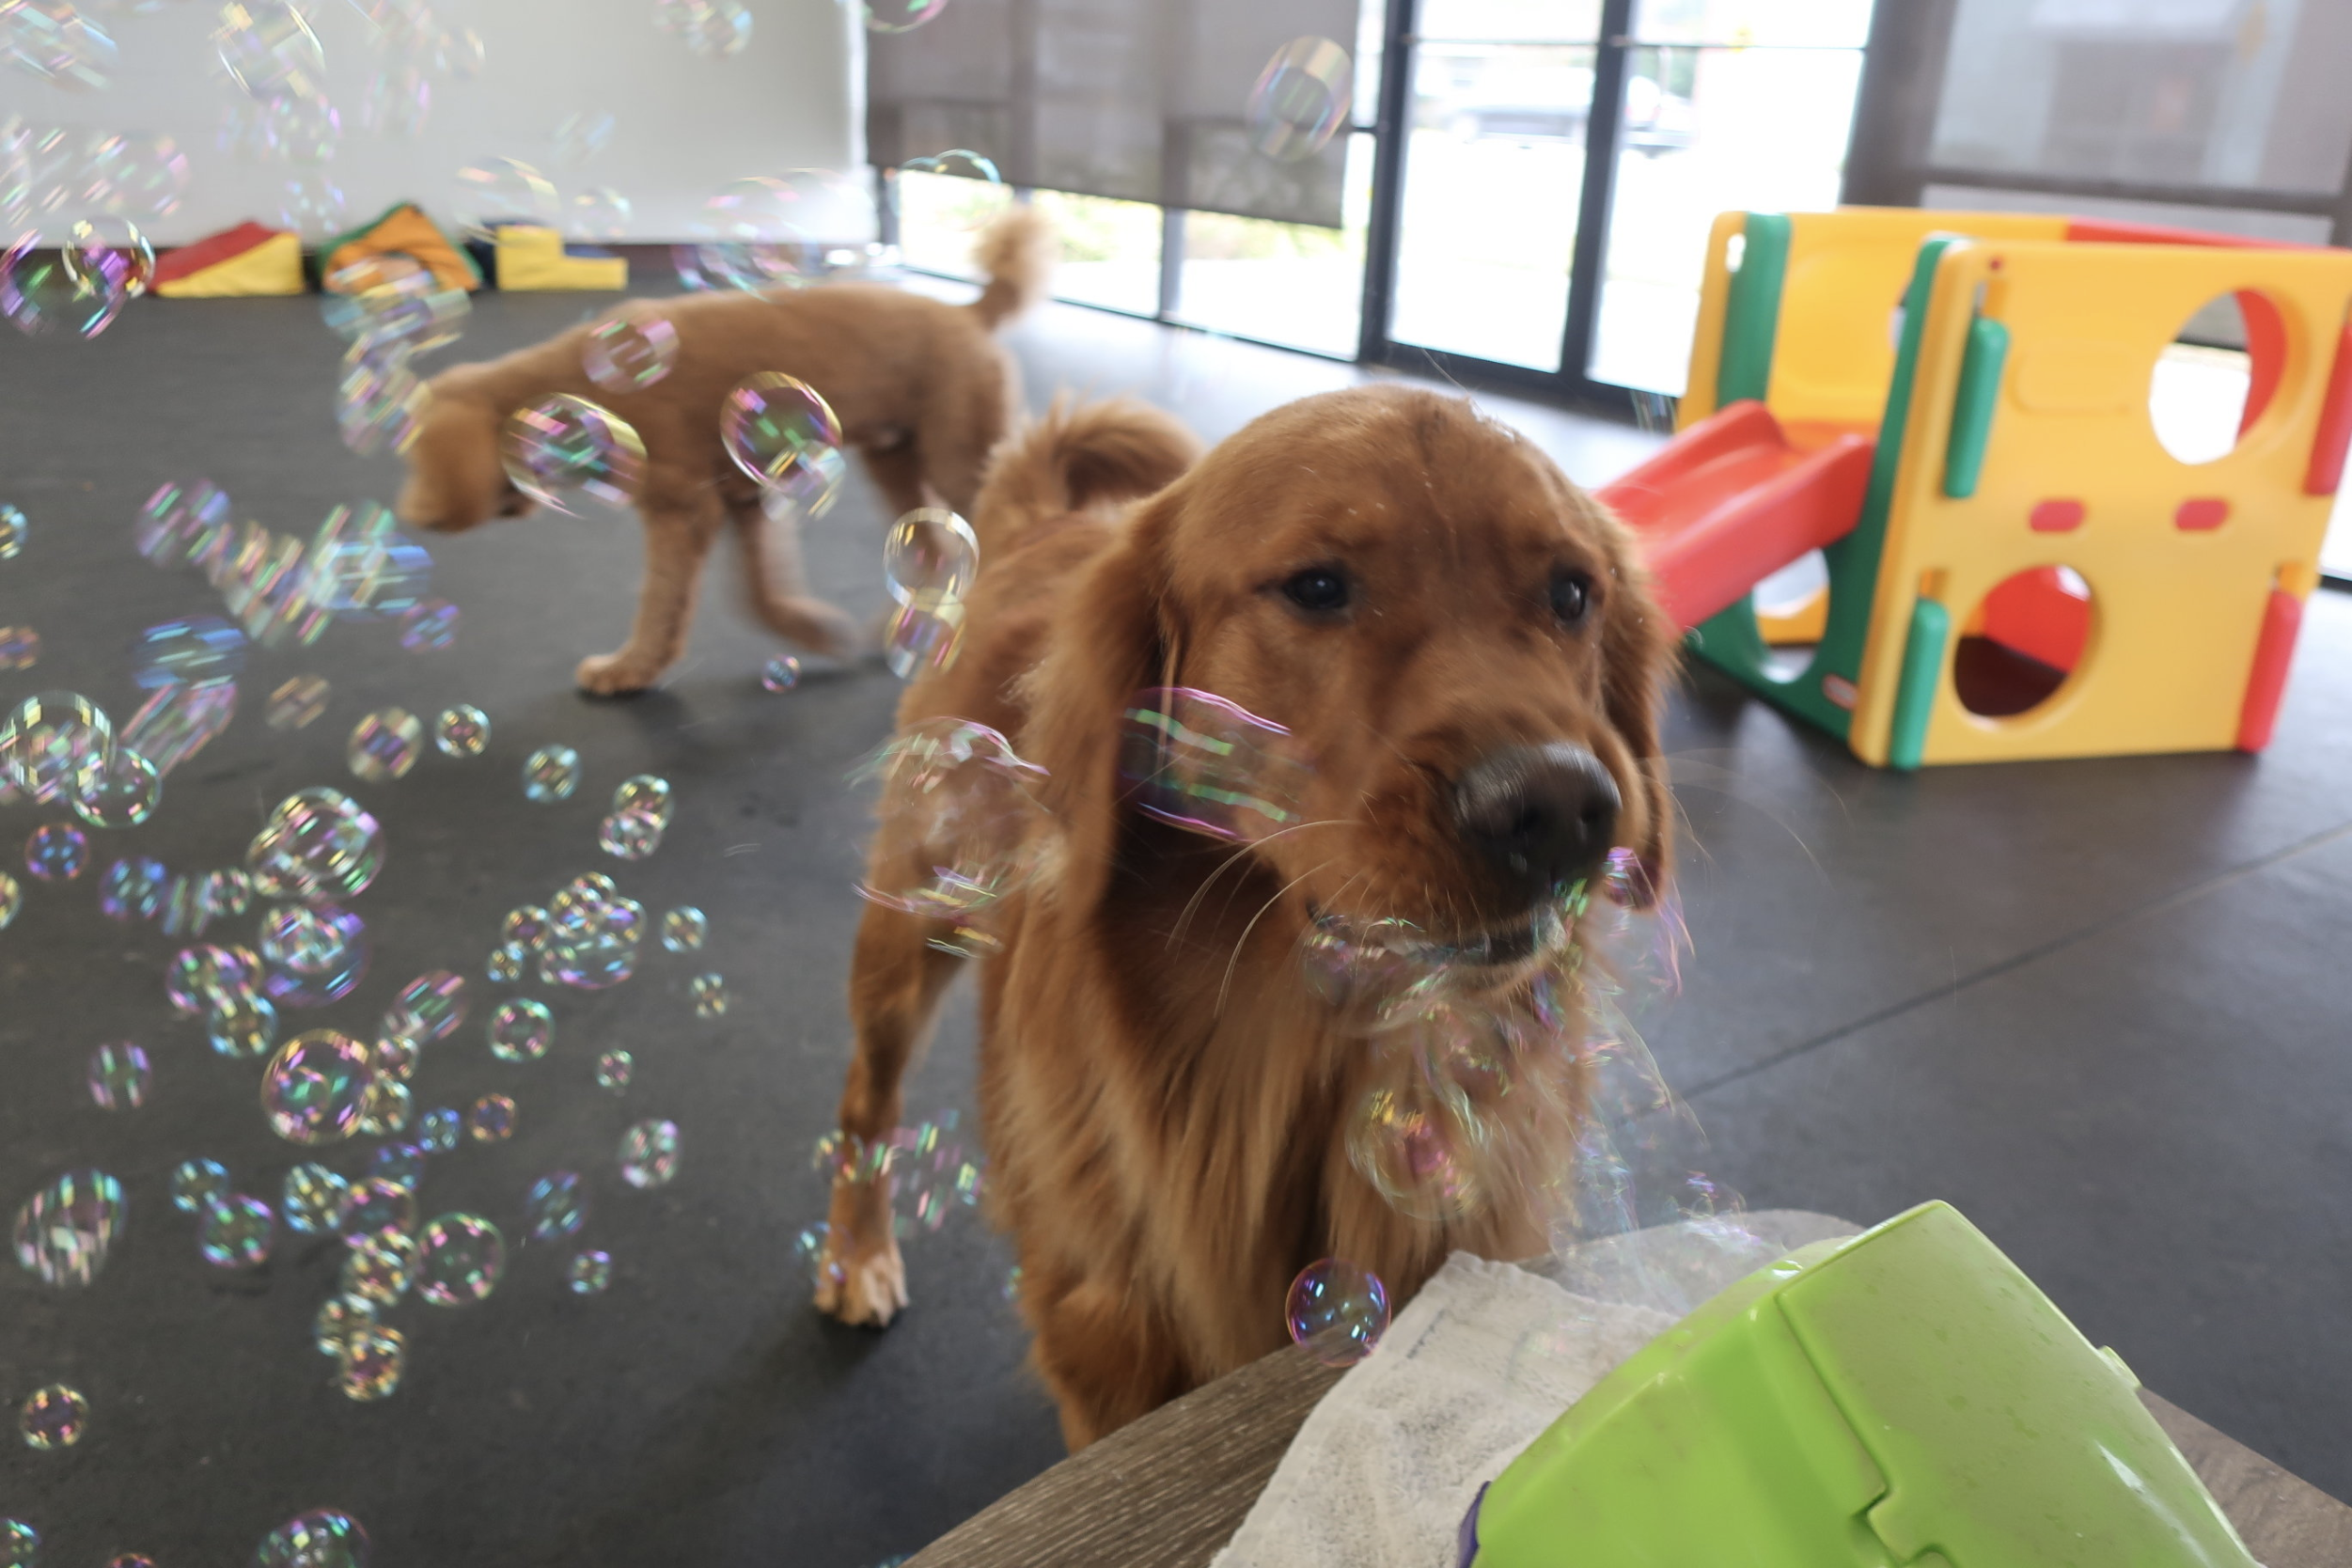 He's a large fan of the bubble machine at daycare.